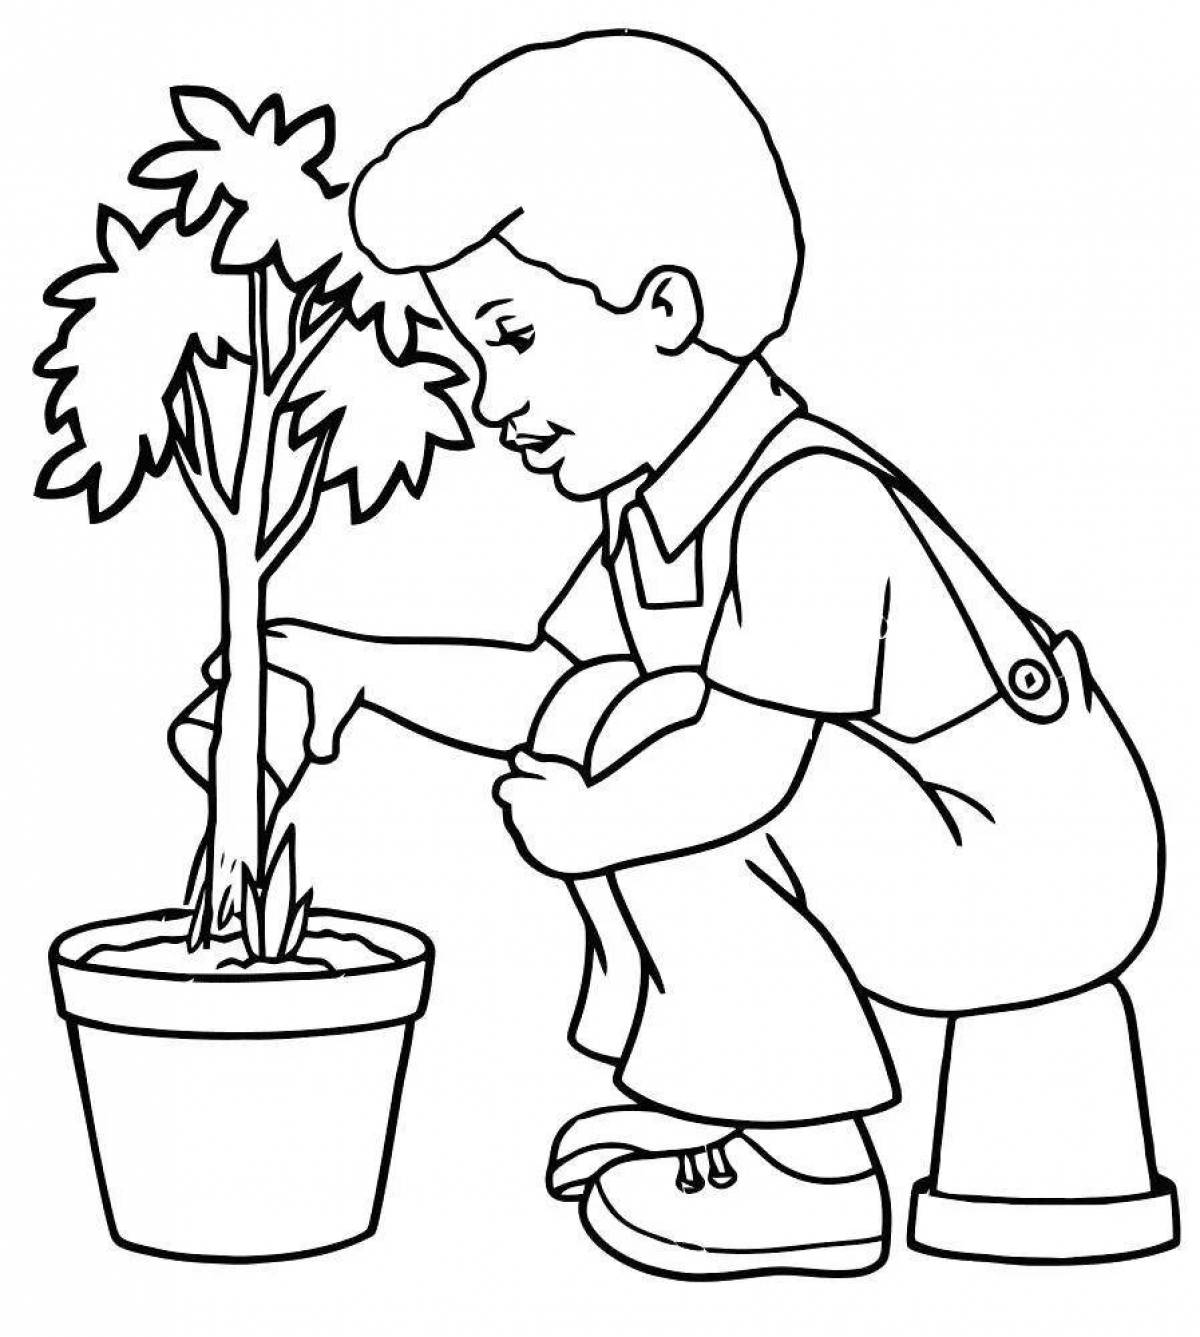 Amazing green friend coloring page